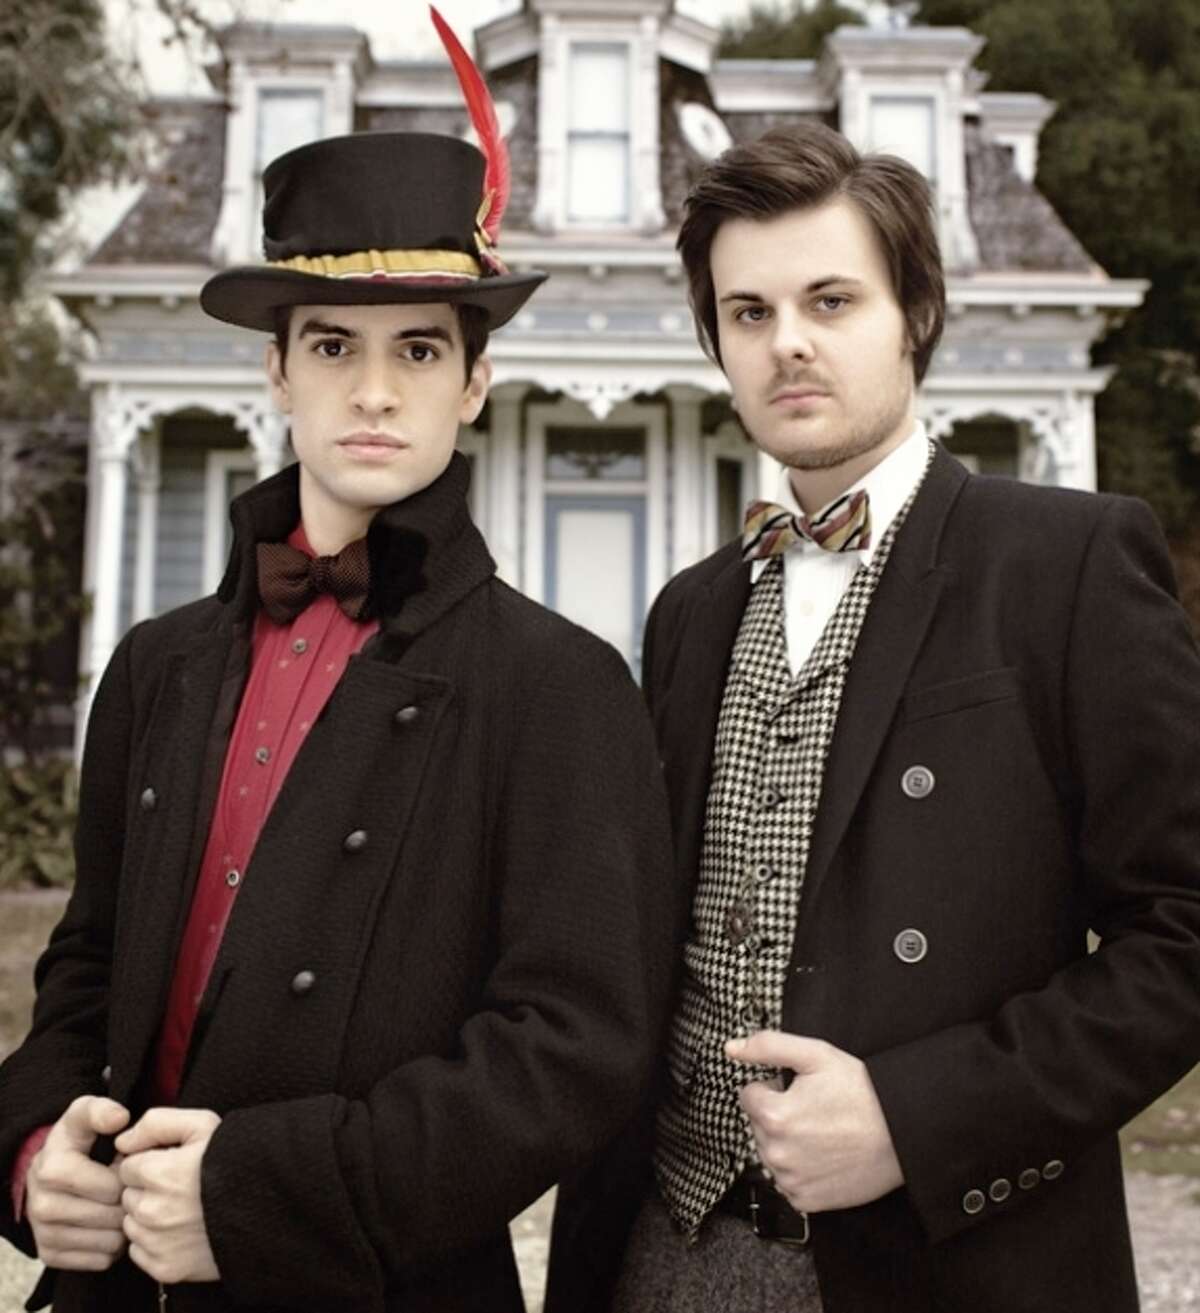 The revamped Panic! at the Disco is still led by Brendon Urie (left) and Spencer Smith.